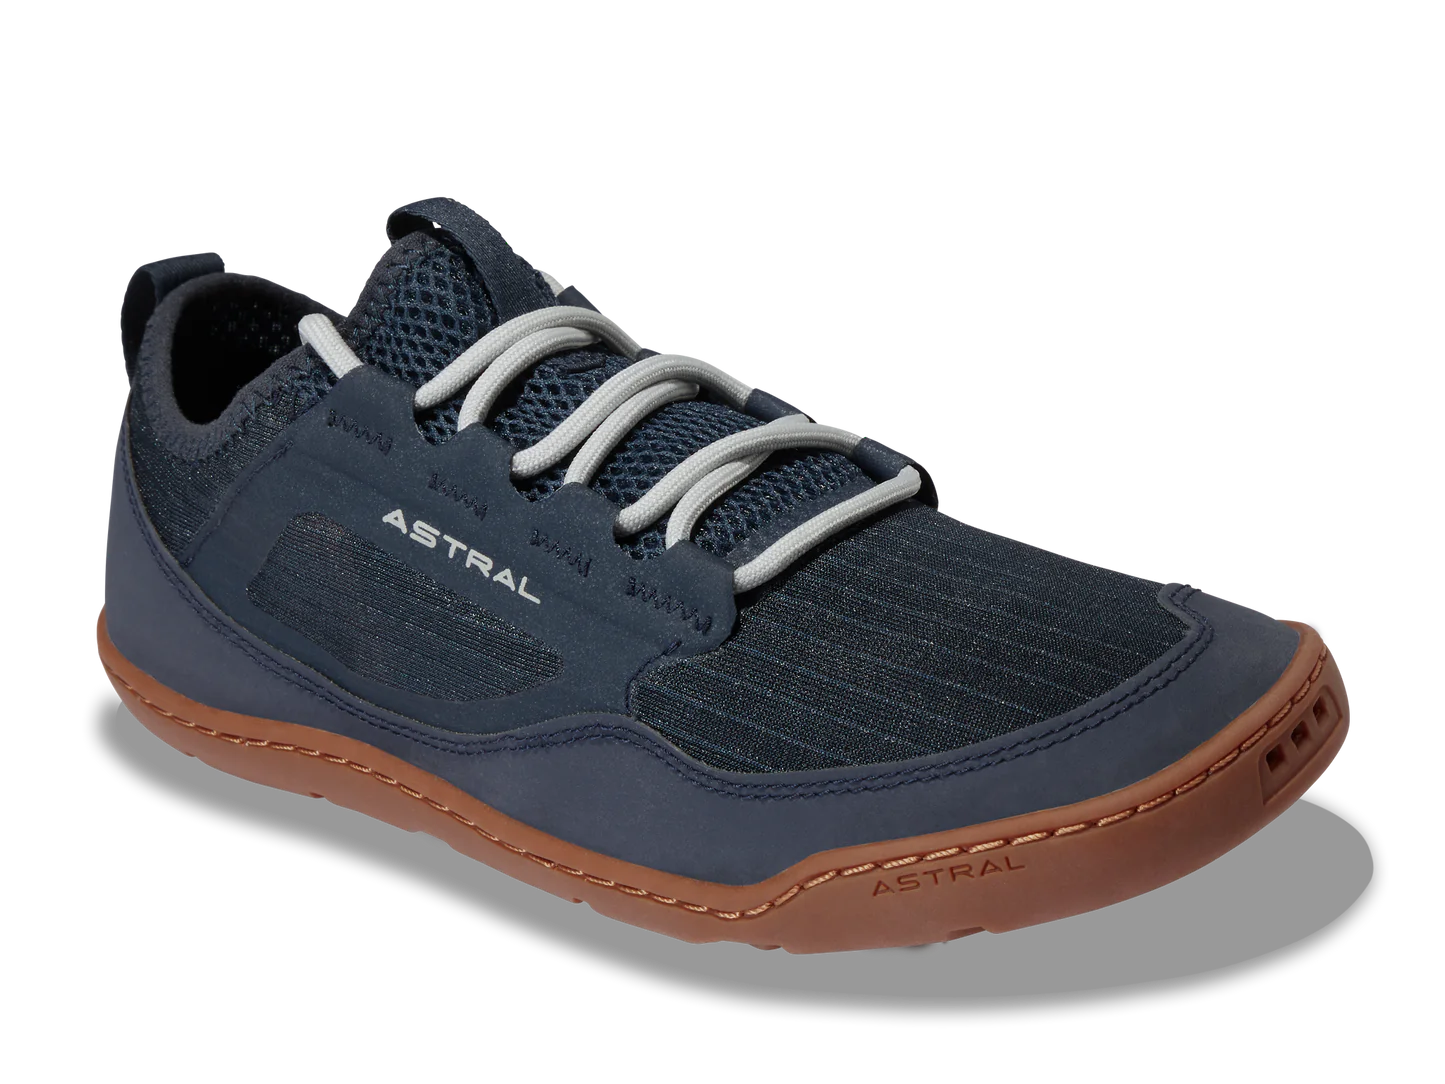 Astral-Shoes-LoyakAC-ClassicNavy-Womens-Angle_1445x